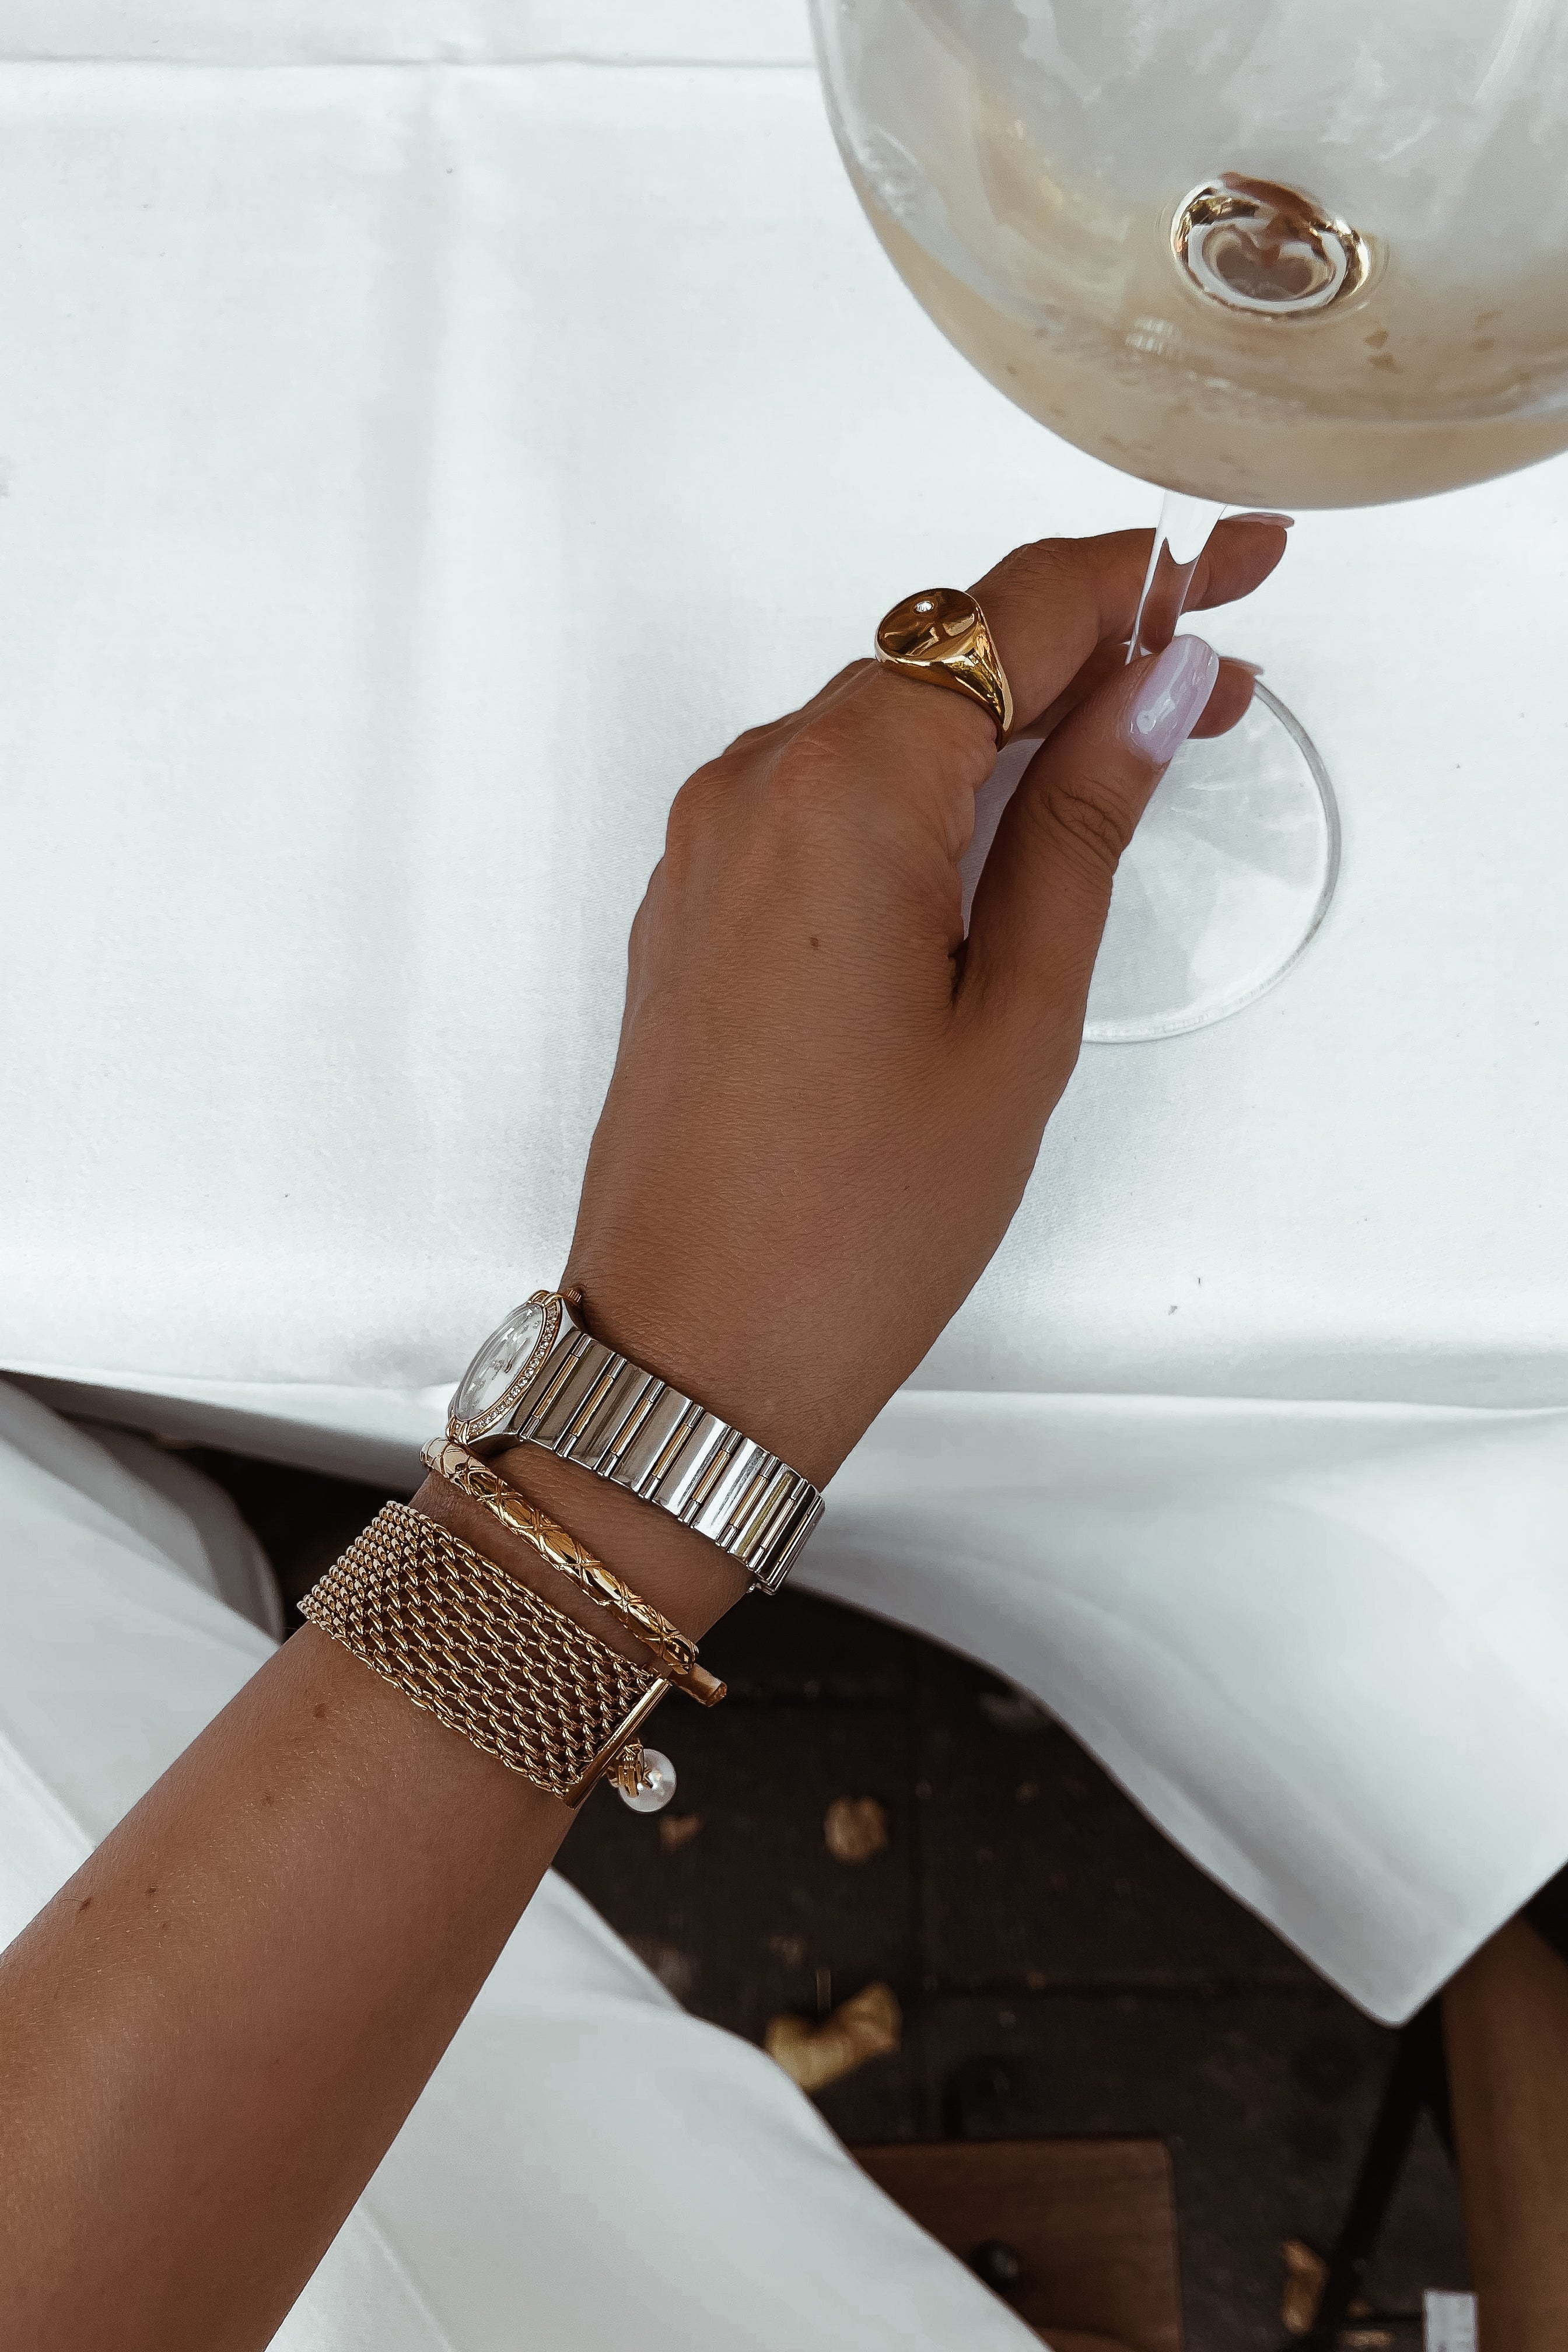 Nora Cuff - Boutique Minimaliste has waterproof, durable, elegant and vintage inspired jewelry